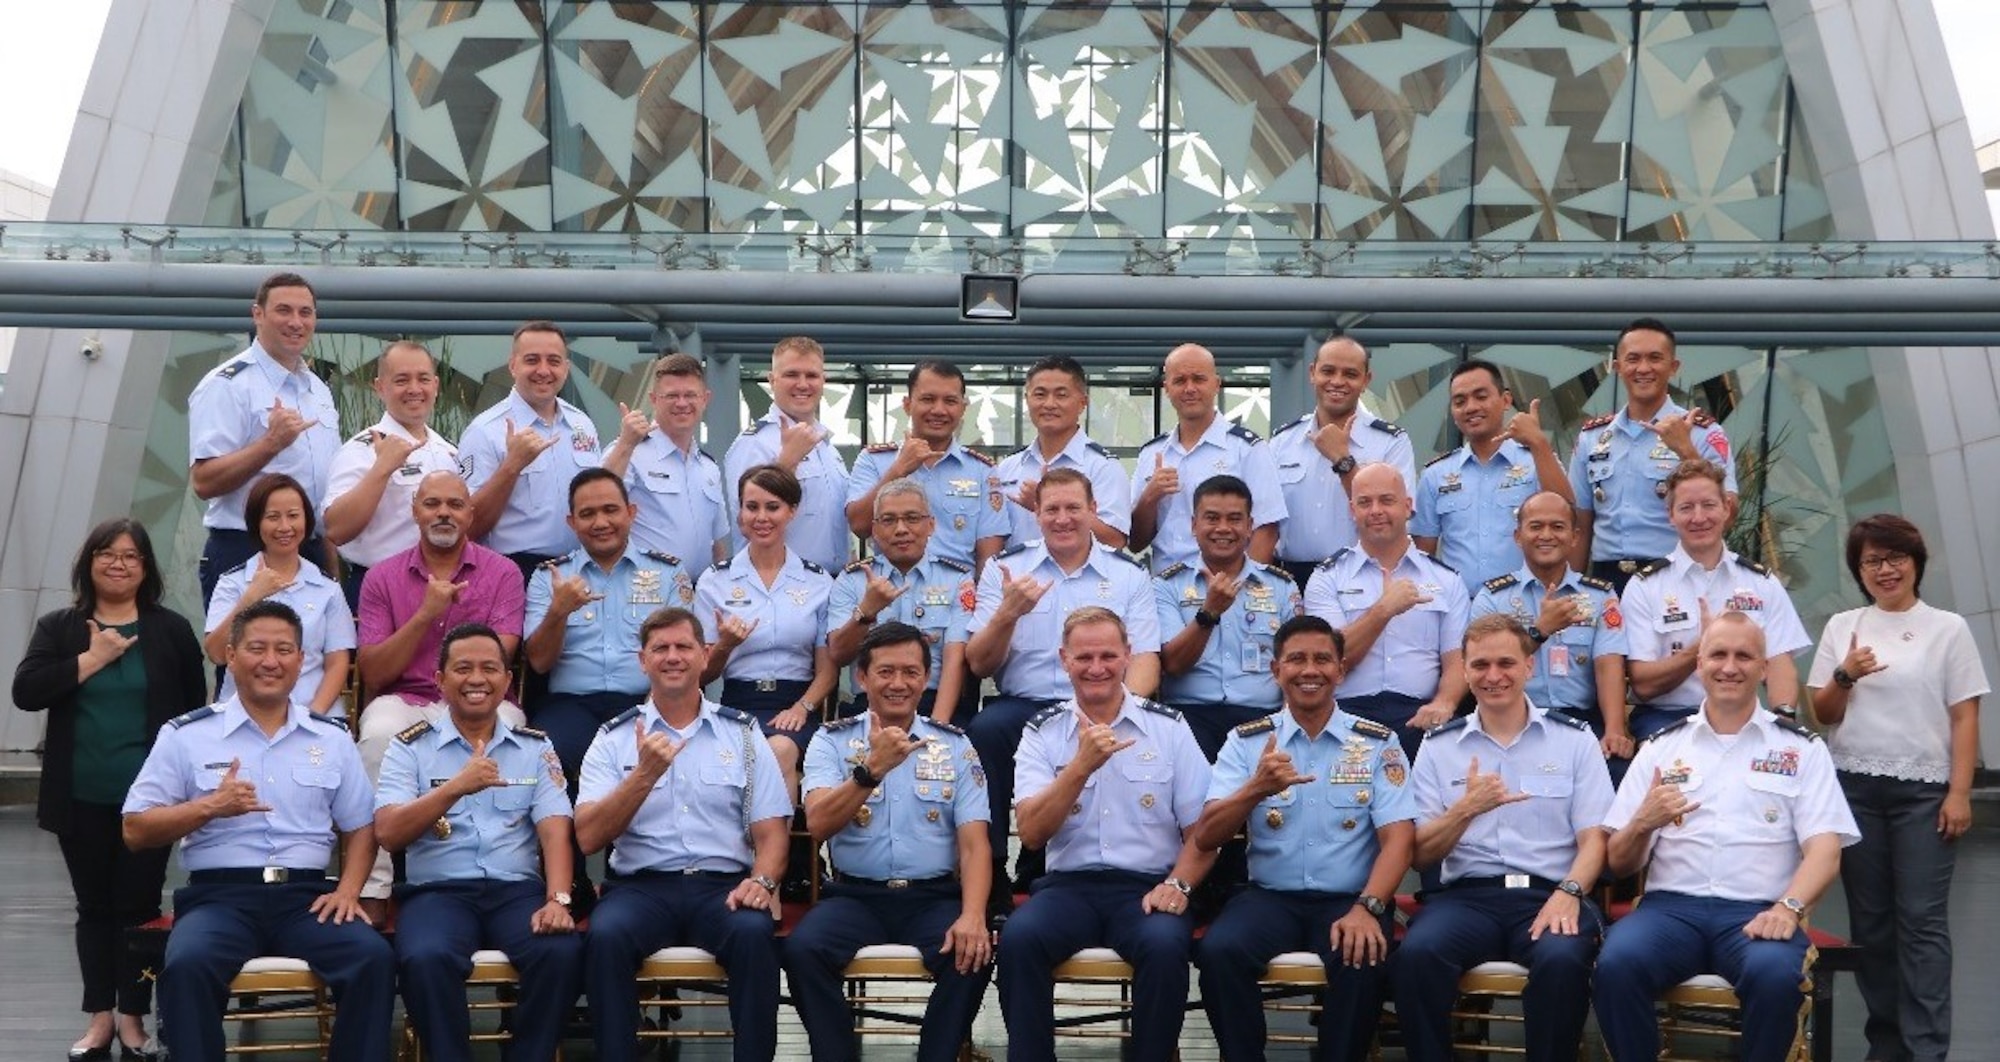 The Indonesian air force hosted a Pacific Air Forces (PACAF) delegation for the 11th annual Tentara Nasional Indonesia Angkatan Udara, or TNI AU (Indonesian Air Force)-PACAF Airman-to-Airman (A2A) talks in Denpasar, Indonesia, May 15-16, 2019.